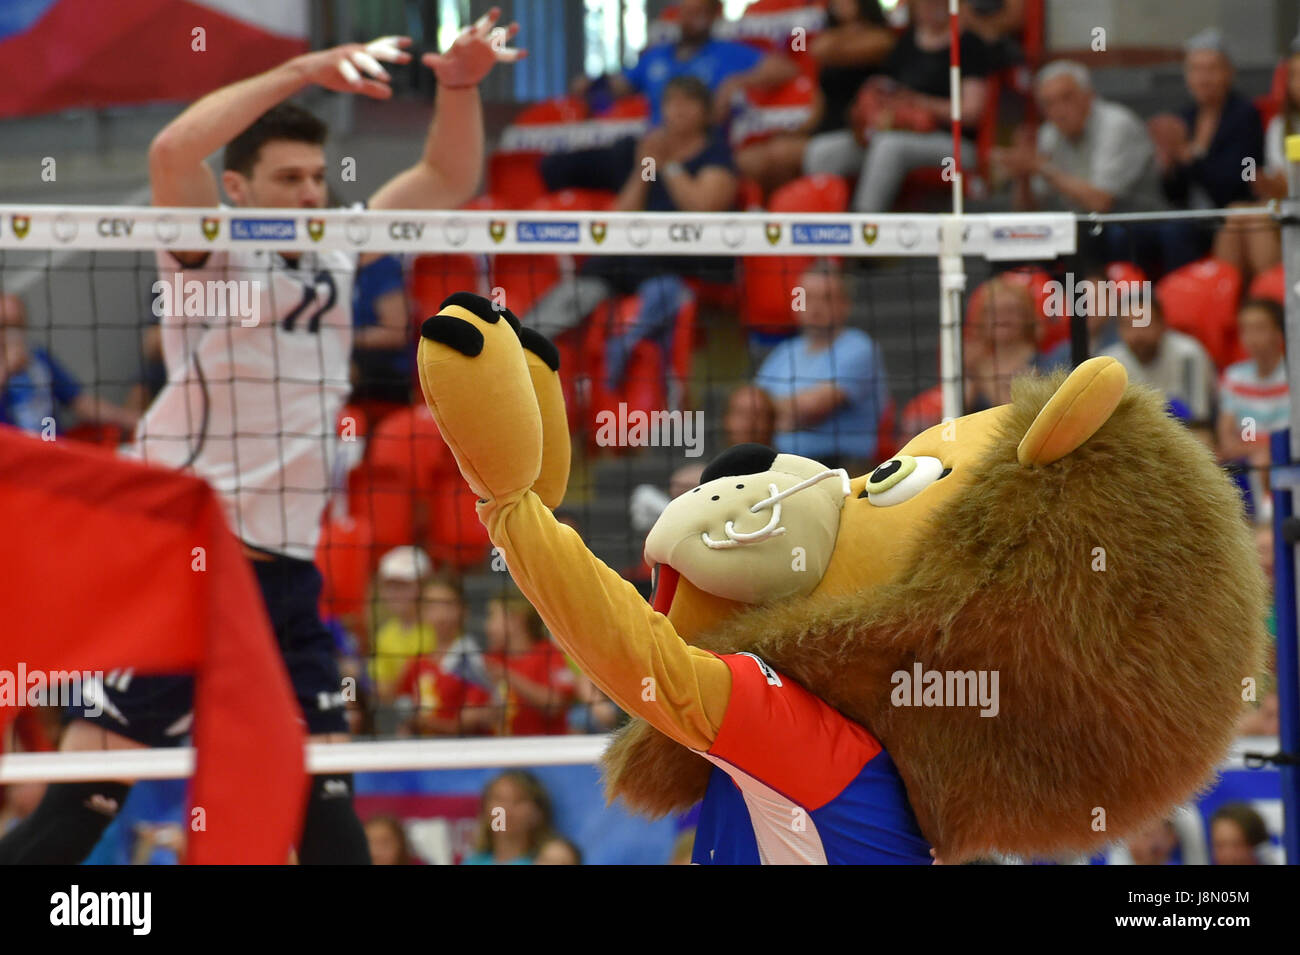 Mascot of Czech team Lion during the volleyball World Cup Qualification match Czech Republic vs Cyprus in Karlovy Vary, Czech Republic, May 27, 2017. (CTK Photo/Slavomir Kubes) Stock Photo